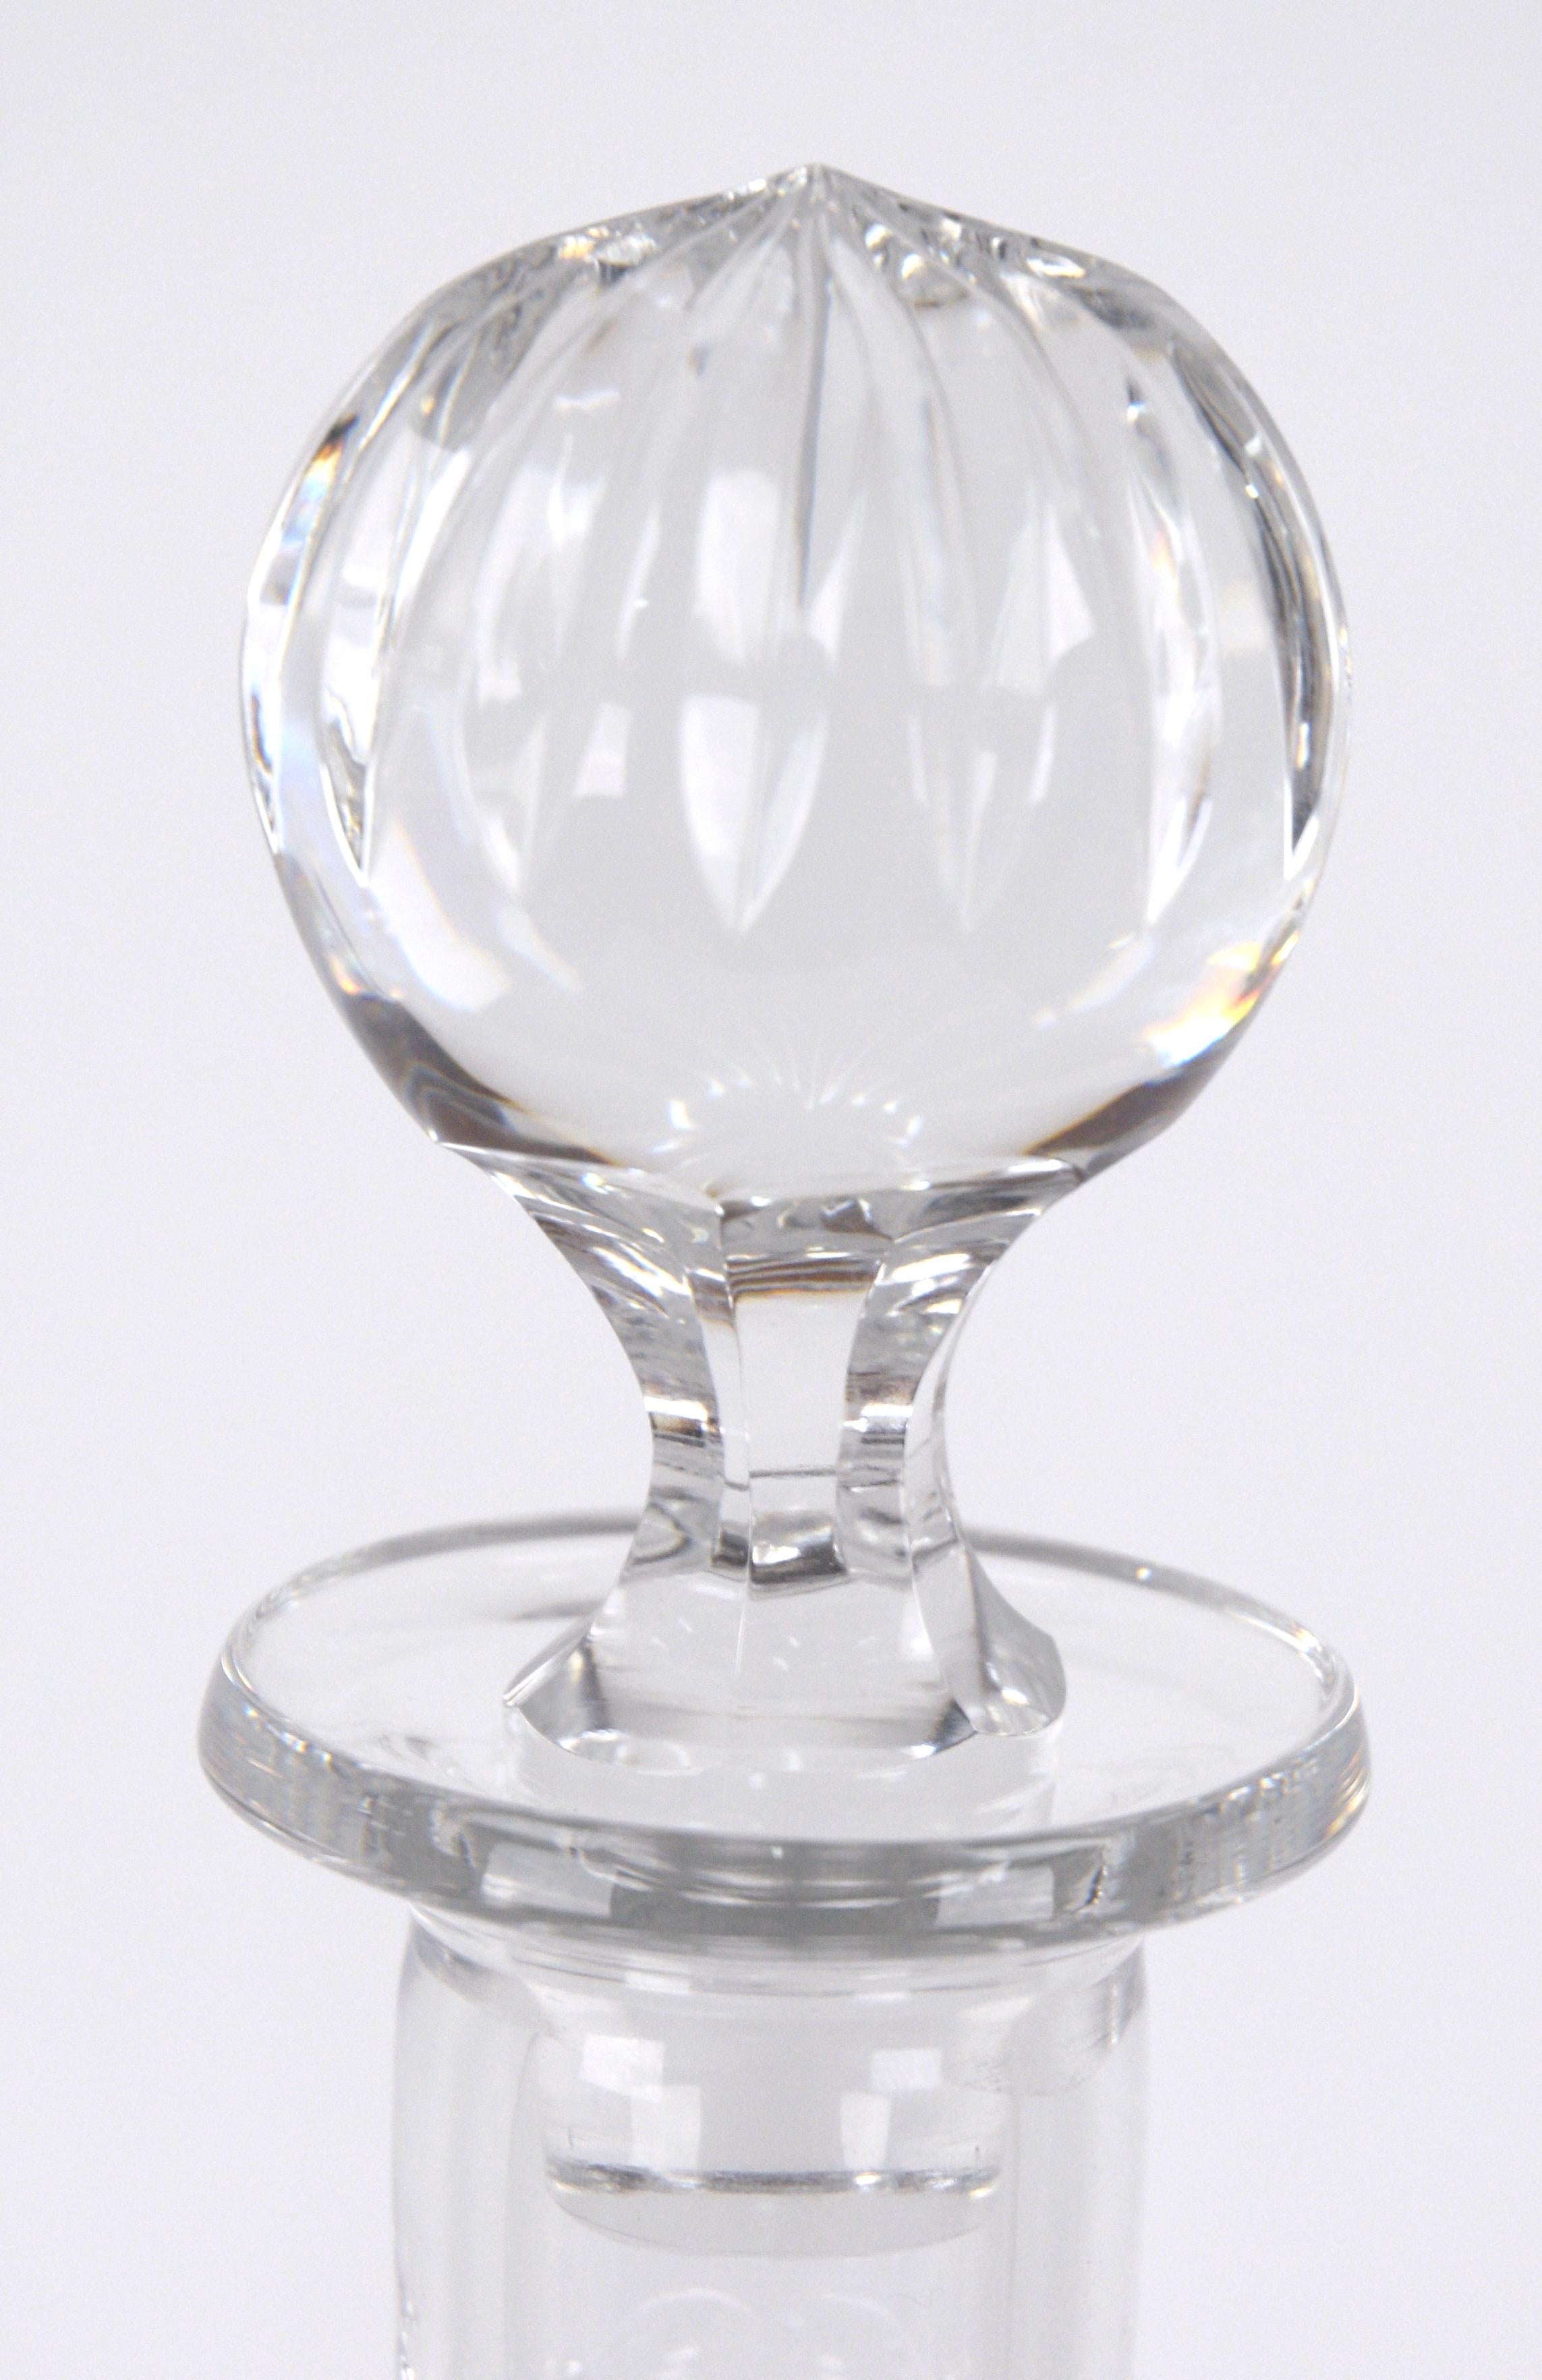 Elegant lead crystal decanter manufactured by Wedgwood, with original glass stopper. This piece has an elegant bulb shape with diamond-shaped facets cut into the sides. 